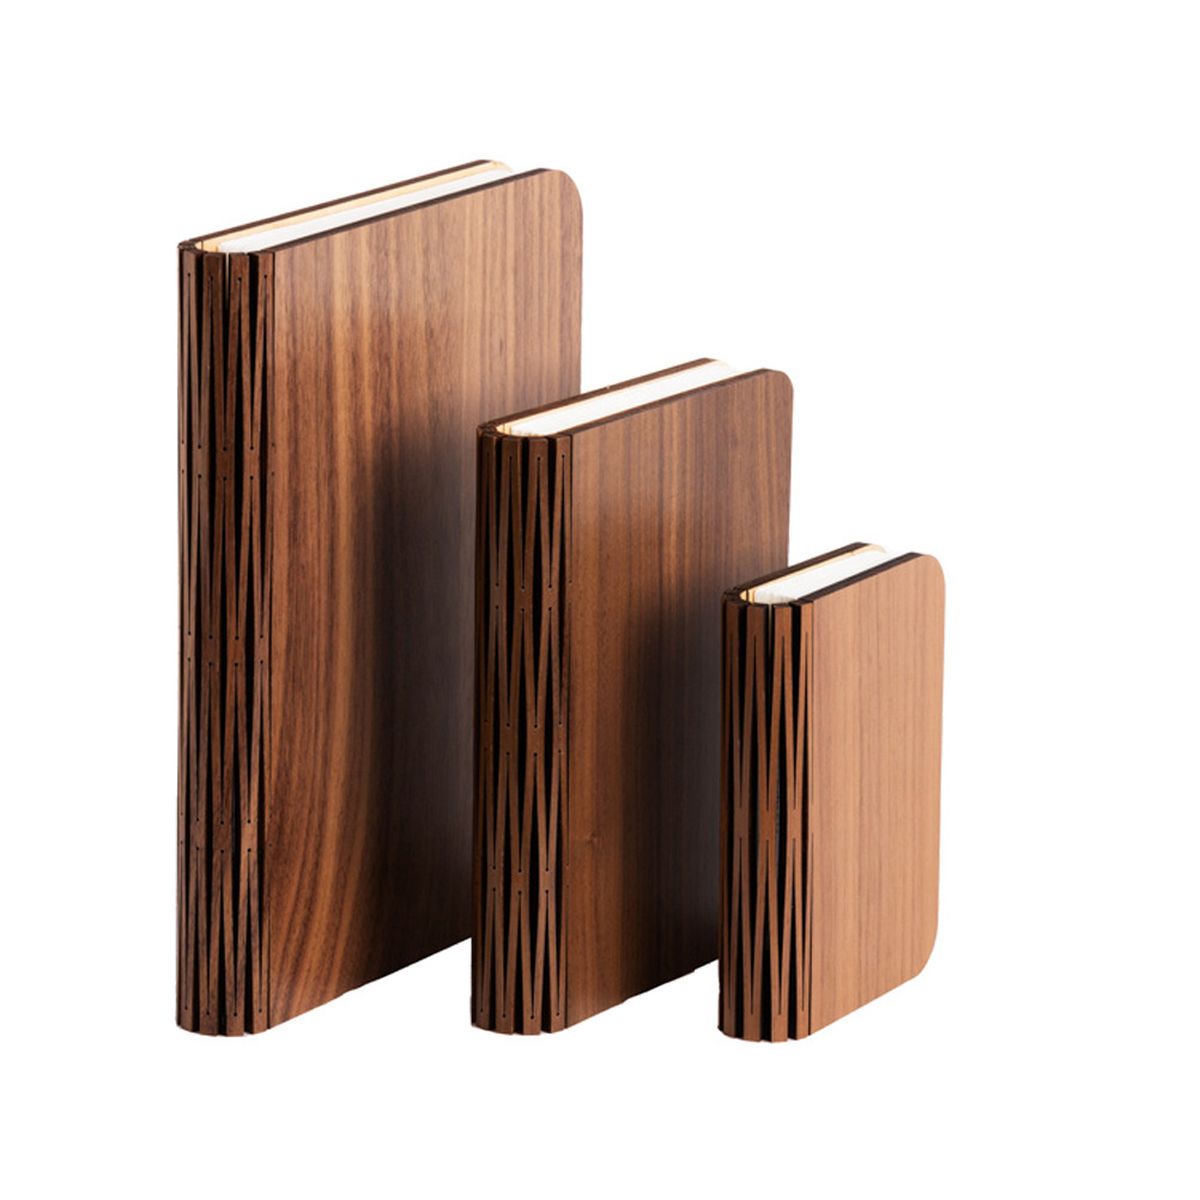 Book lamp in real wood - color Walnut - Size M